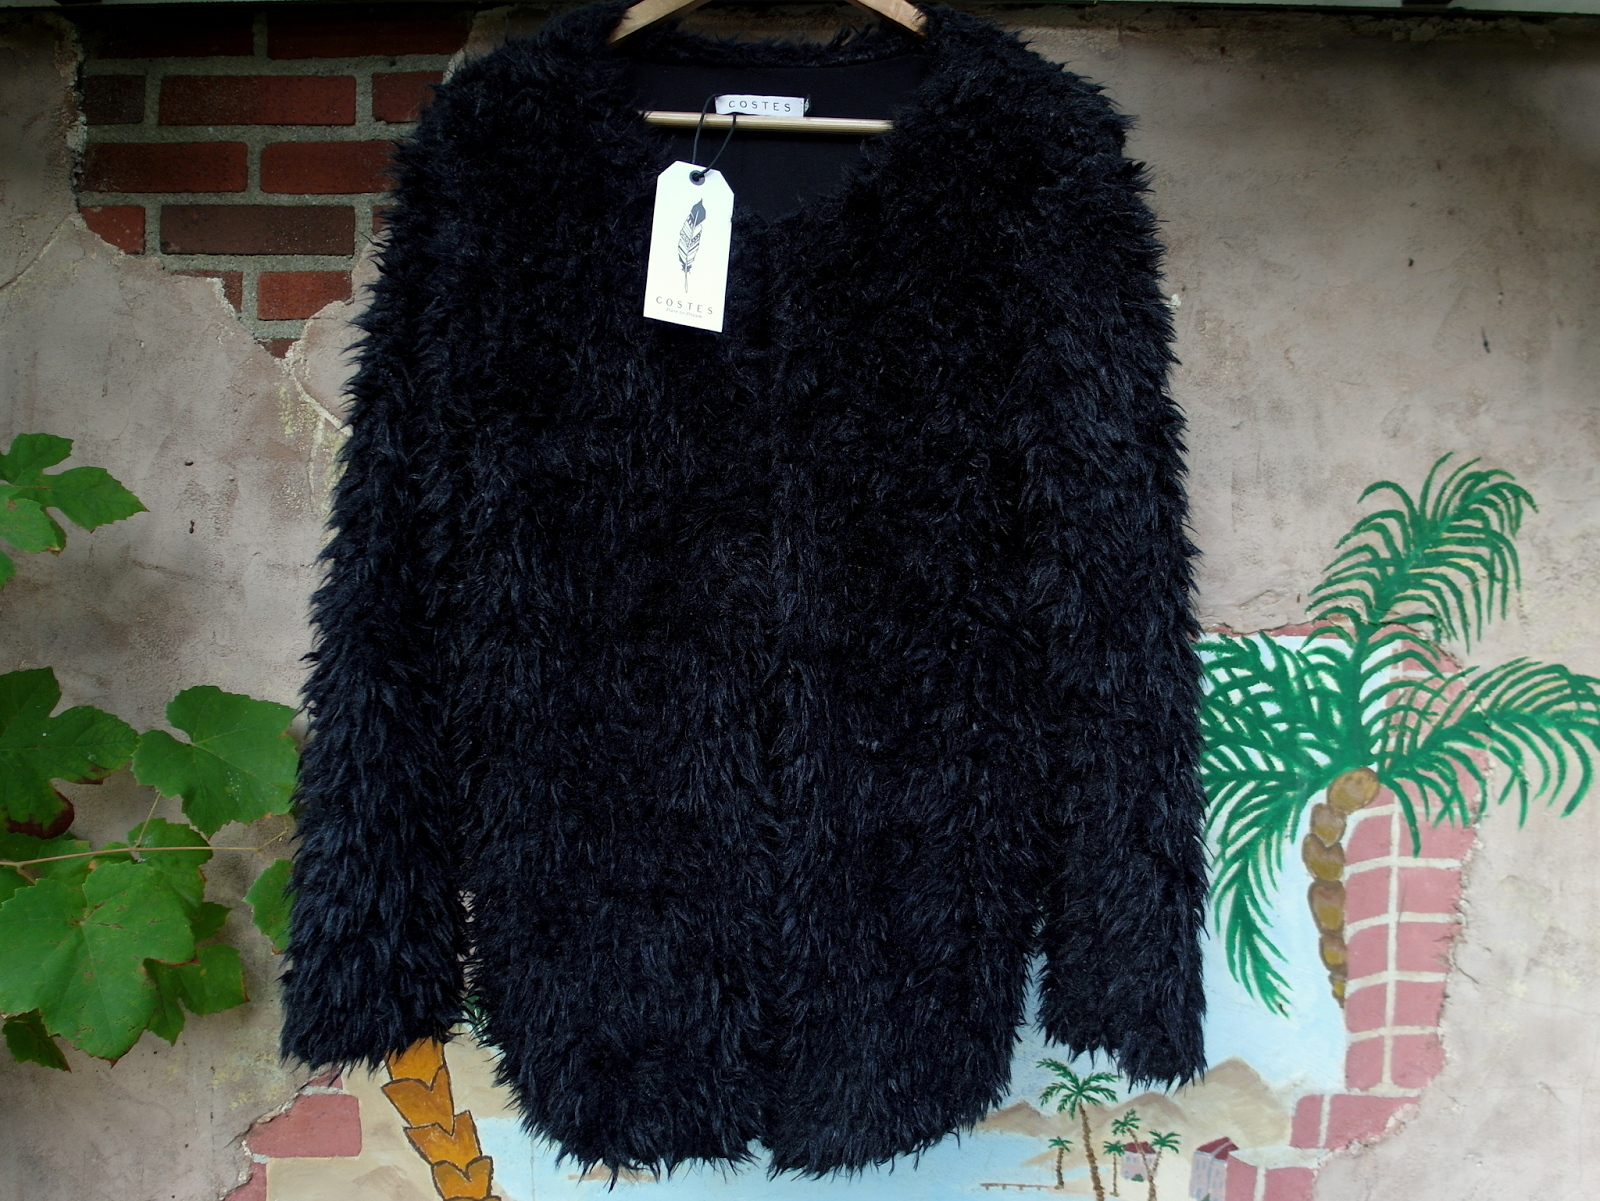 in Fluffy Costes vest - People Stare